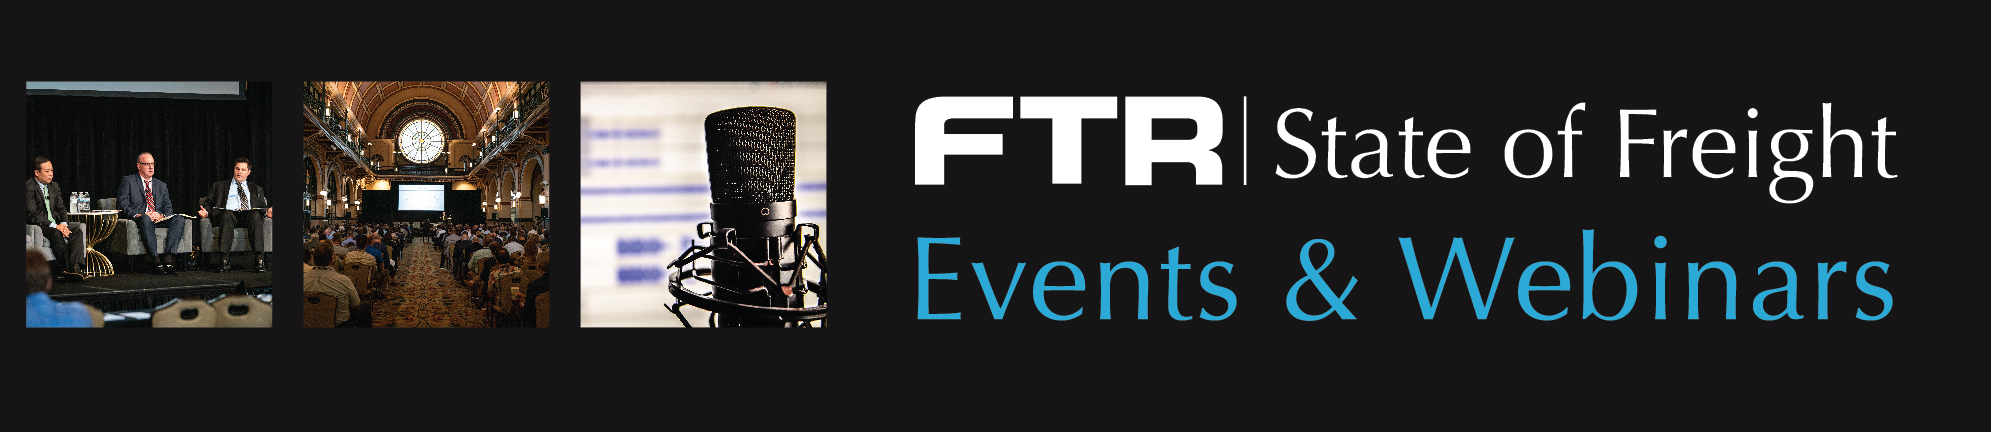 FTR State of Freight Events & Webinars